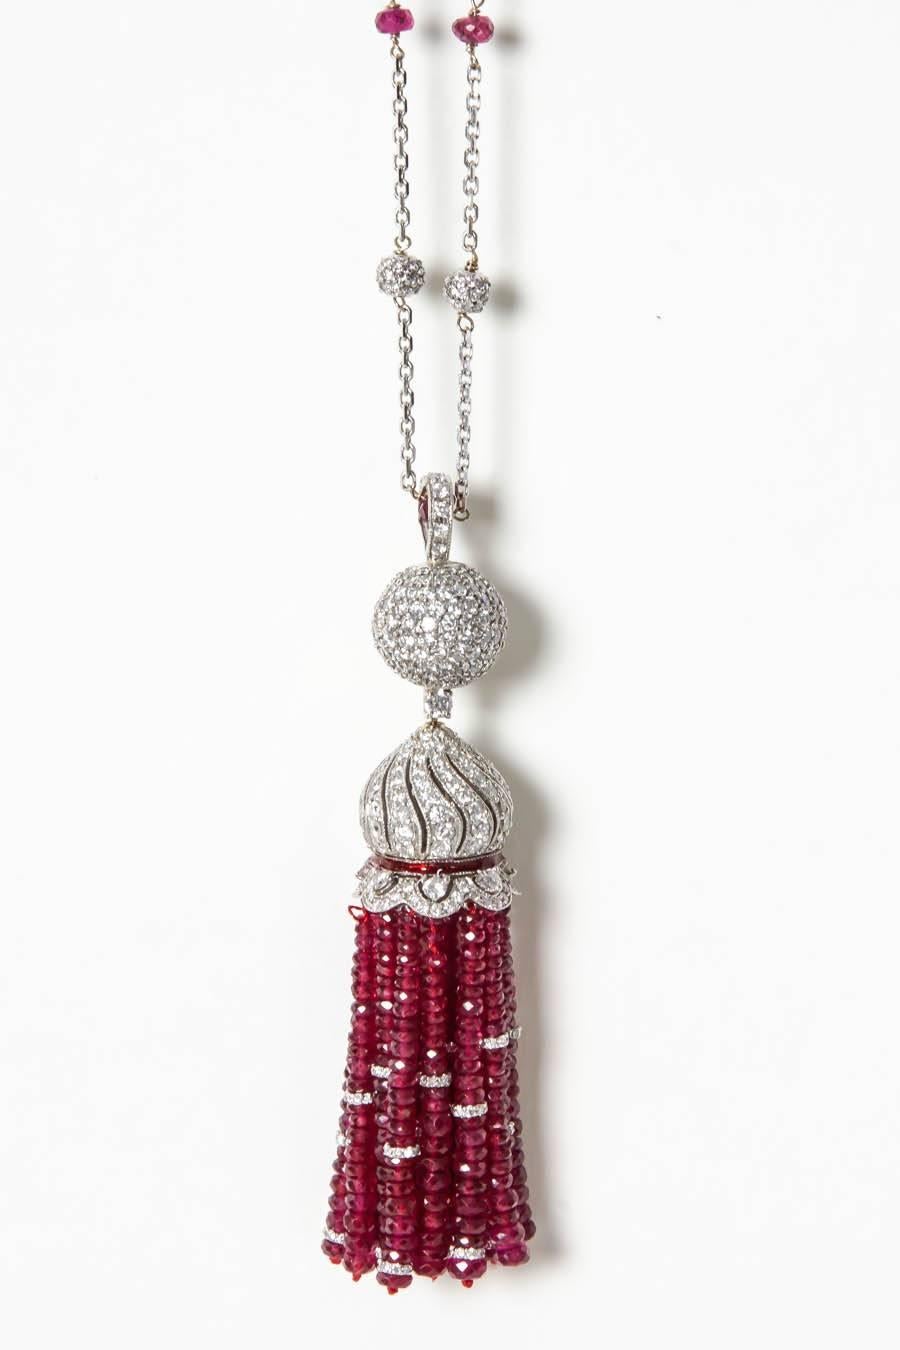 High quality tassel necklace made in New York.

We use the finest Burma Ruby beads -- 70 carats in this tassel!

9.37 carats of round brilliant cut diamonds all set in 18k white gold. 

A fun and fabulous piece!